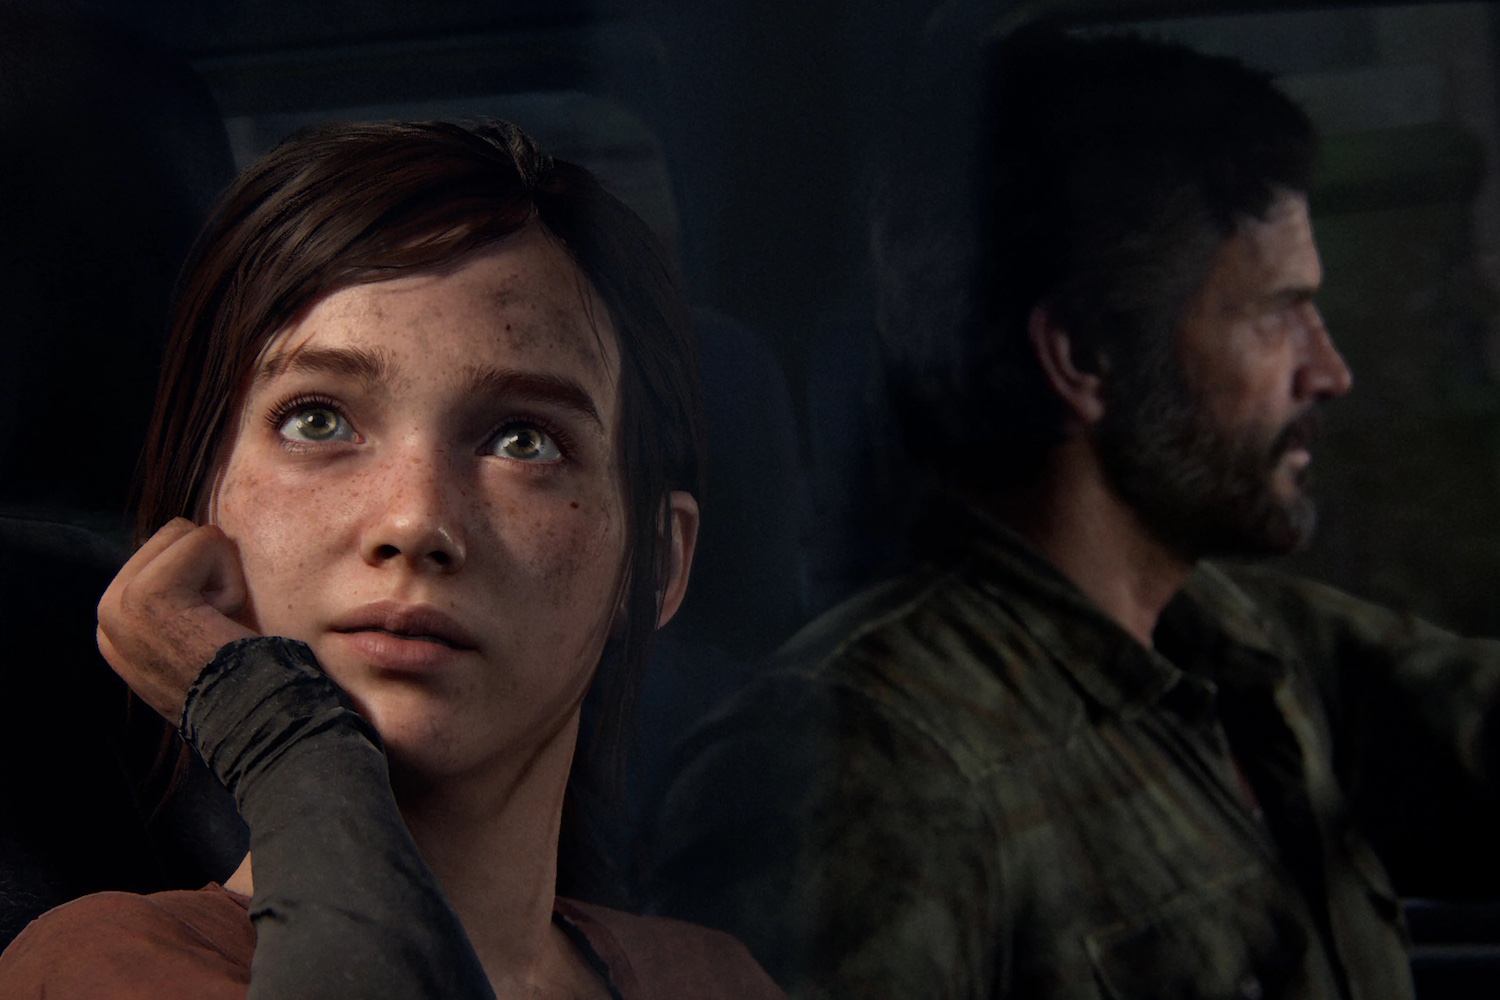 HBO's The Last of Us Podcast Episode 2 - Infected (Podcast Episode 2023)  - IMDb